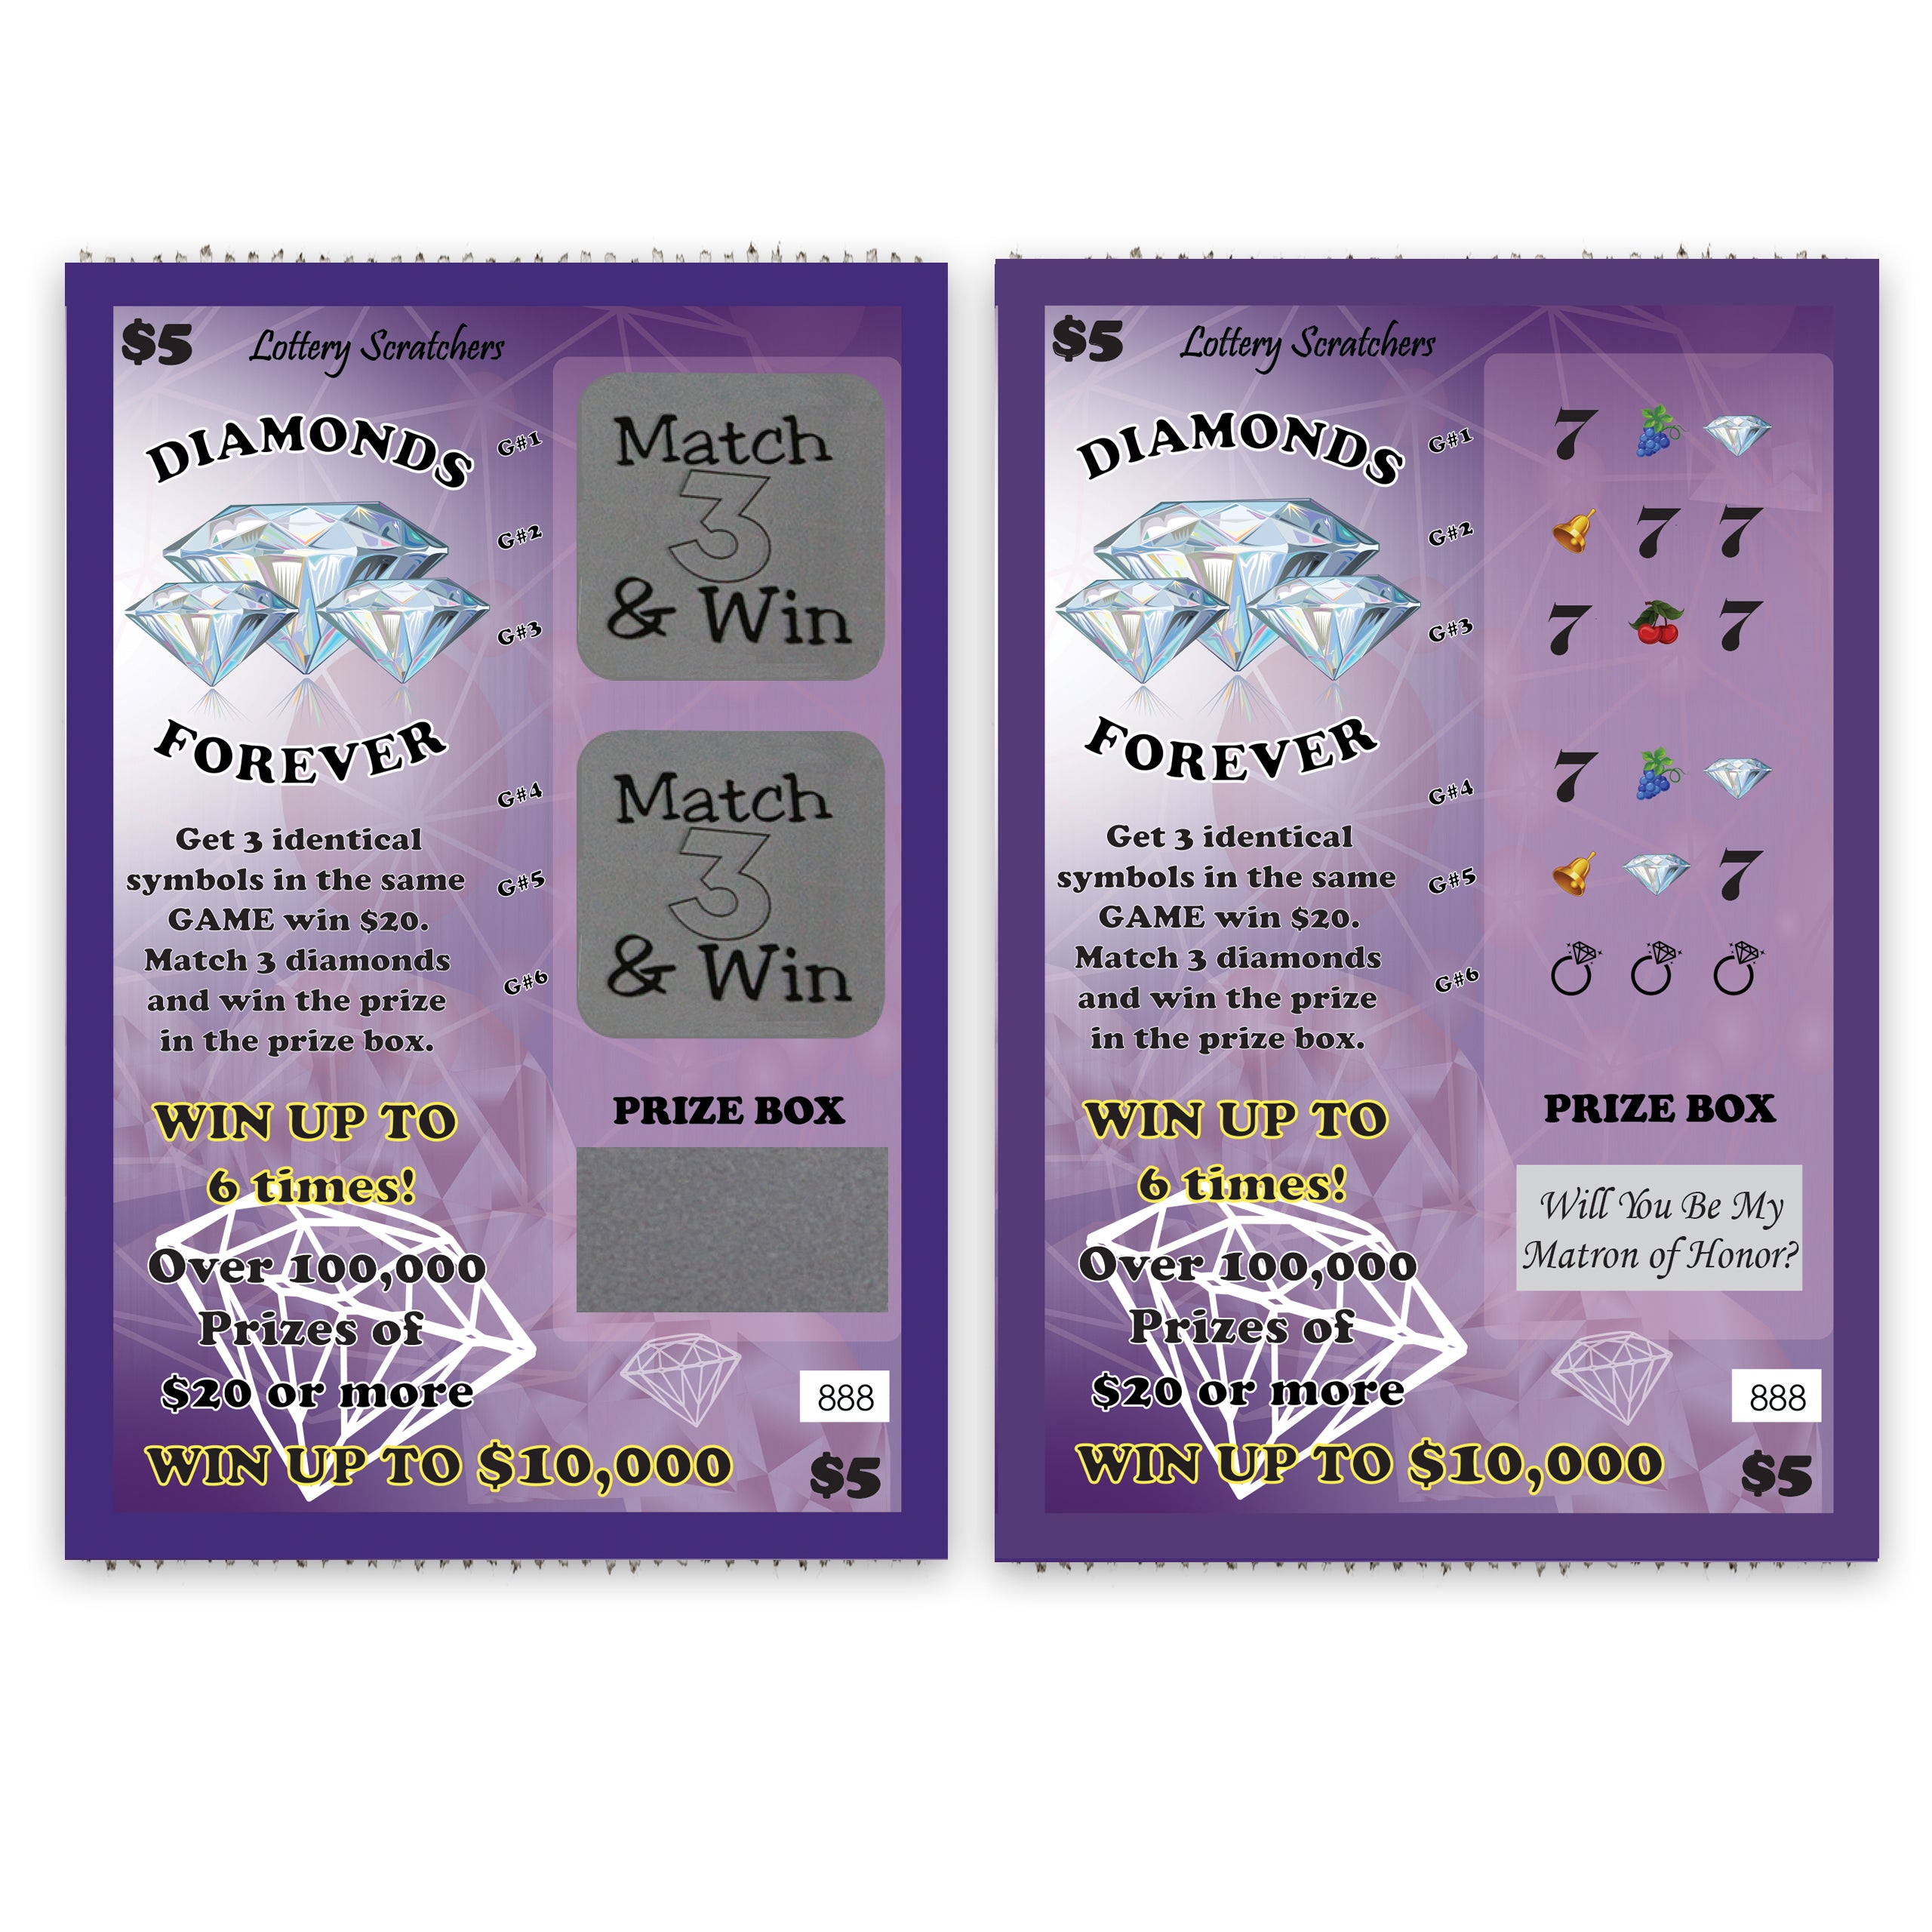 Will You Be My Matron of Honor? Lotto Replica Scratch Off Card 4" x 6" - Purple